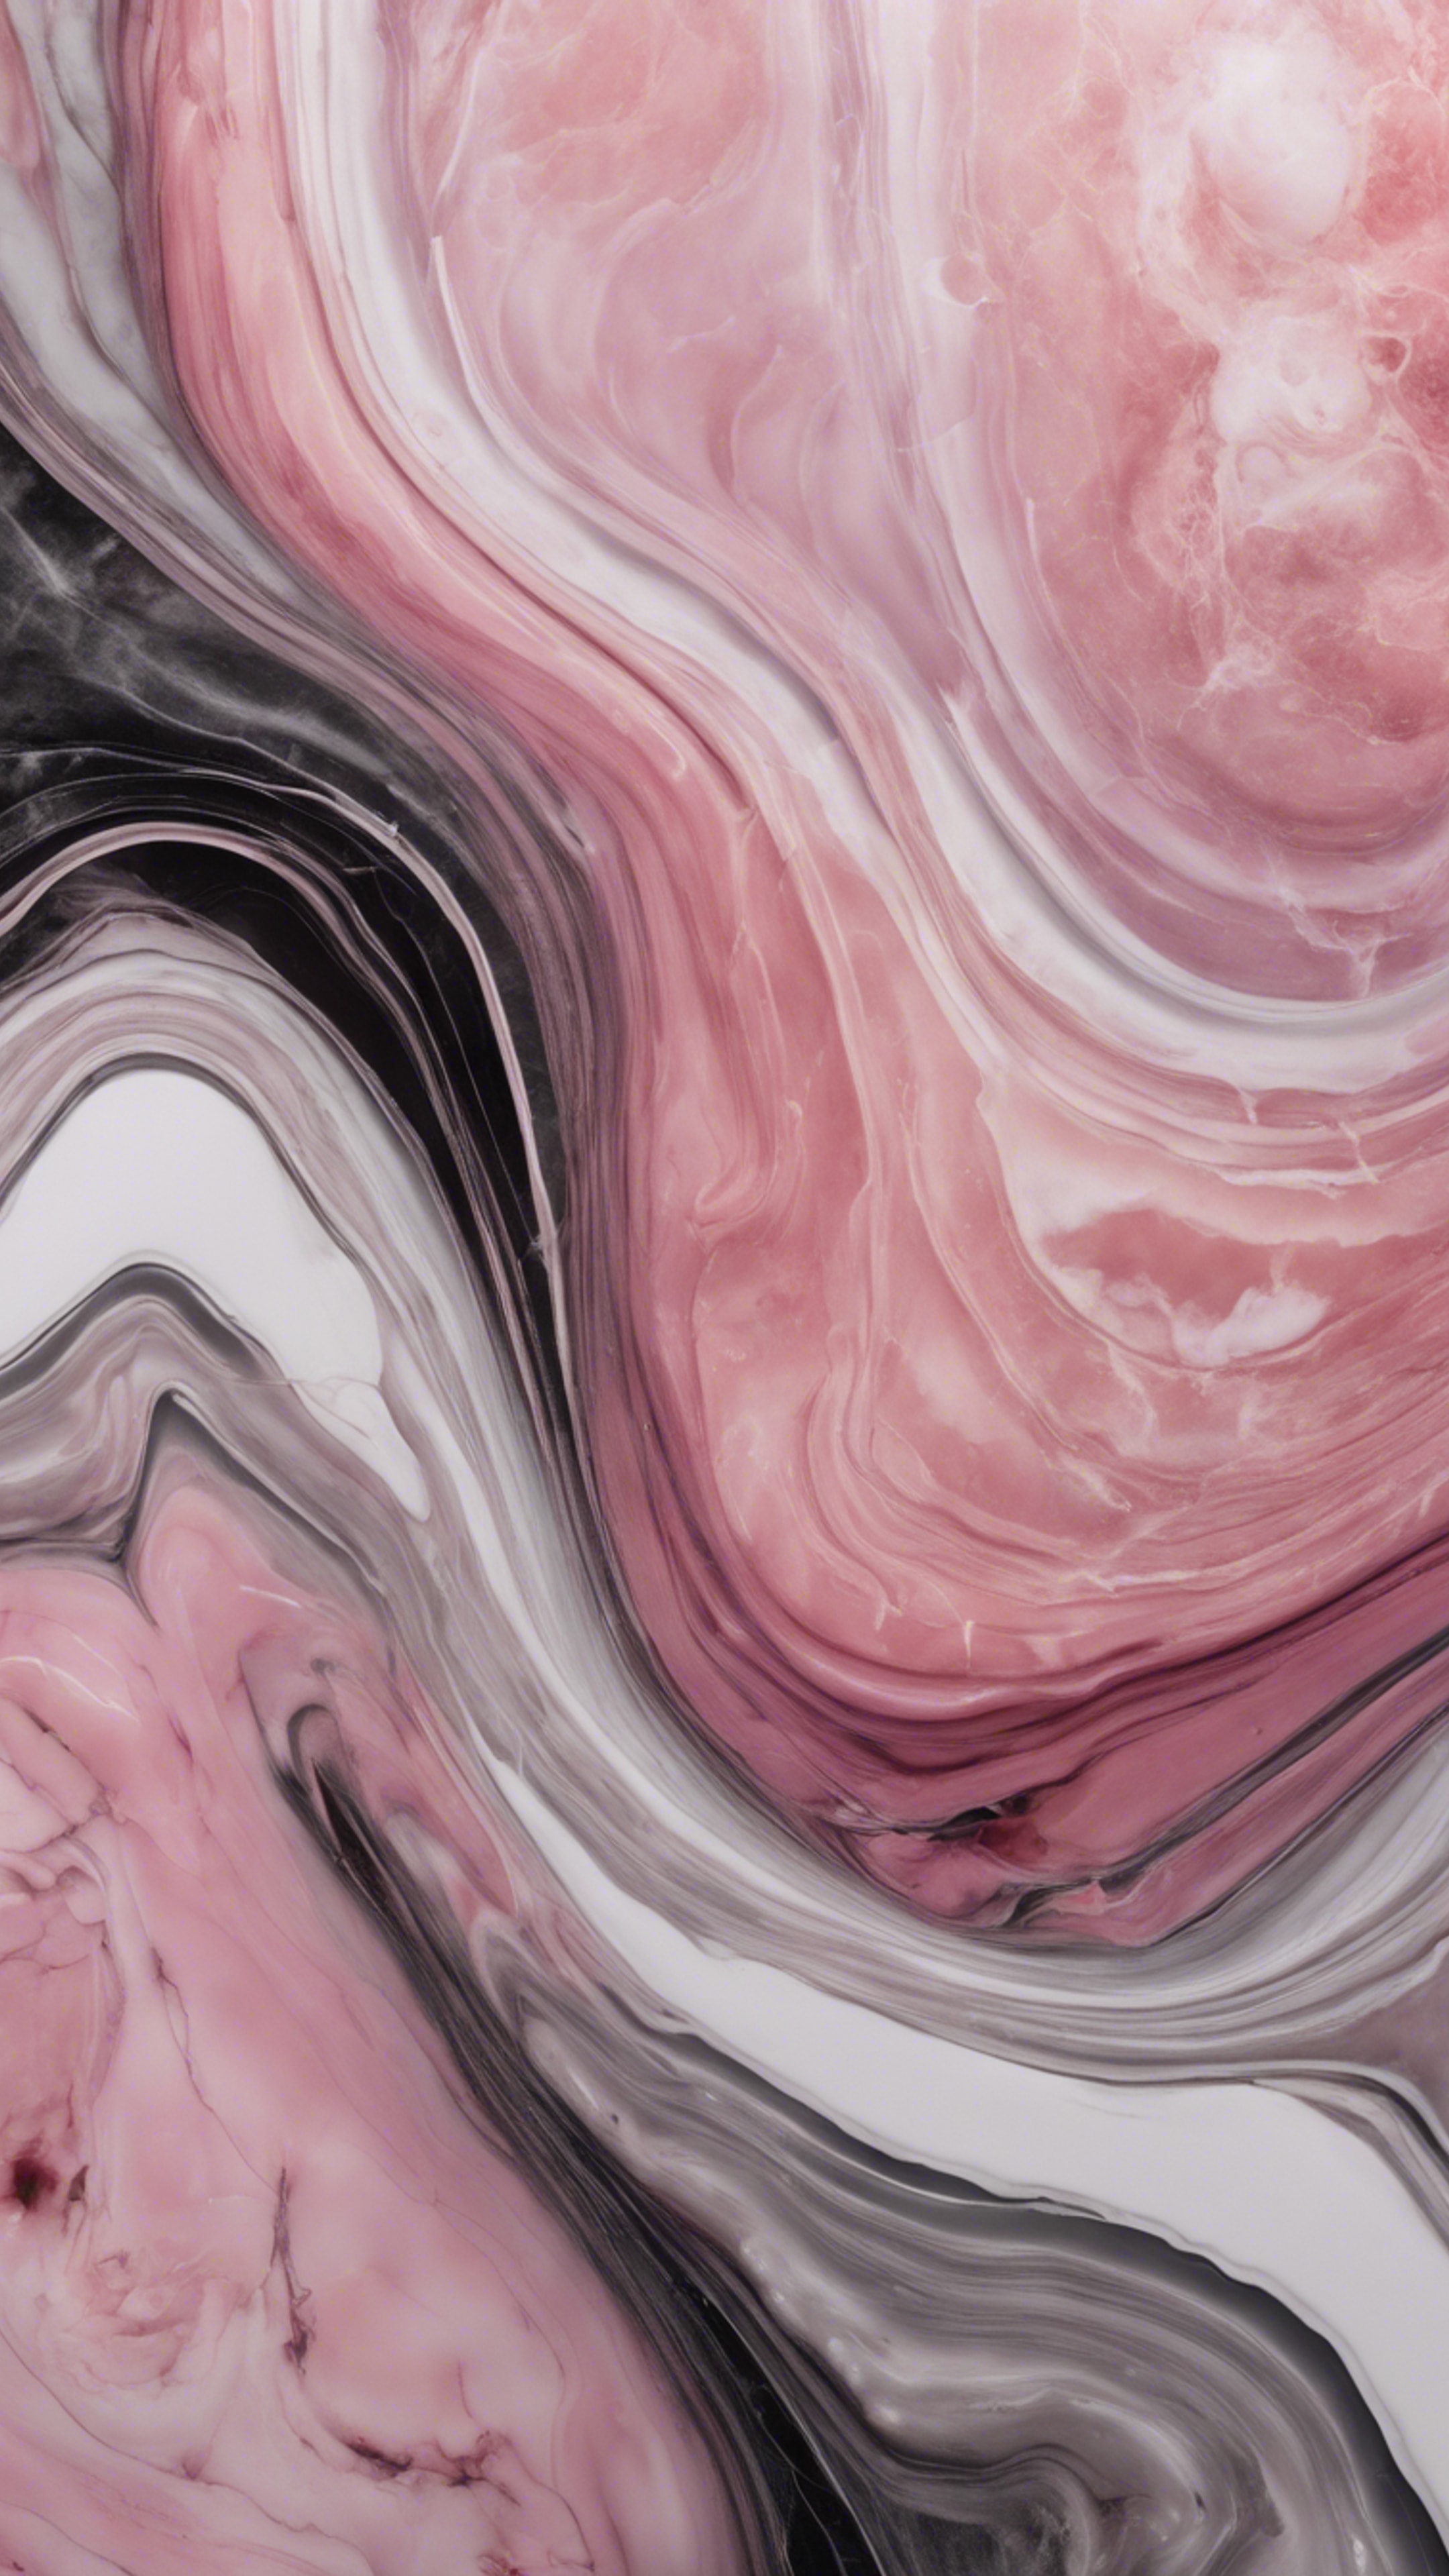 An abstract representation of pink marble, incorporating waves of deep pinks, soft whites, and dark greys. Tapeta[5ac081f457bf4dc8ac1f]